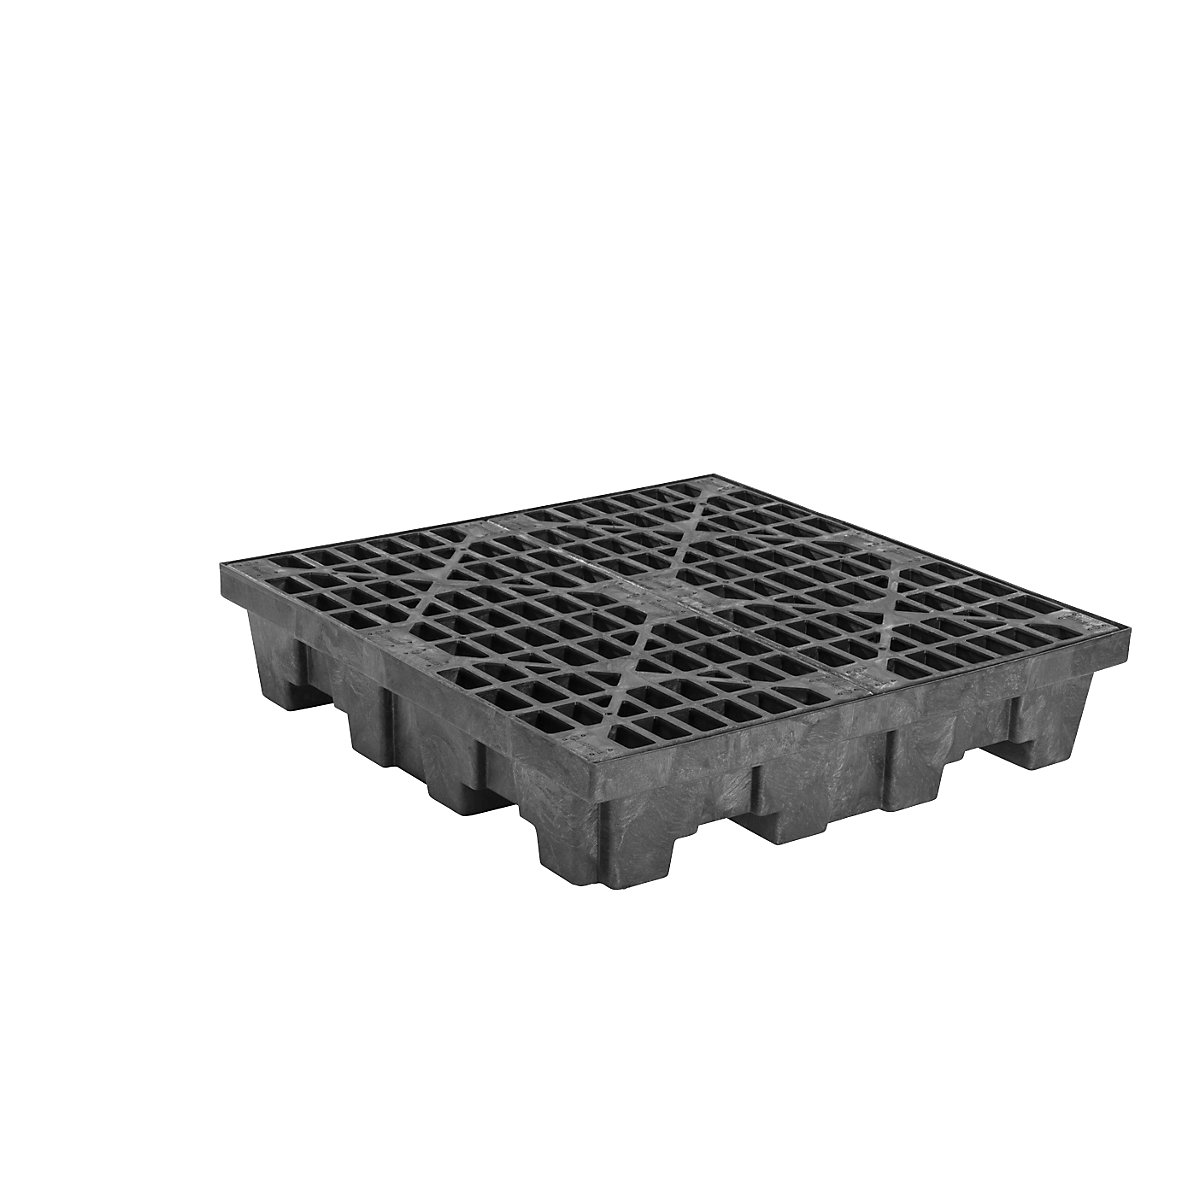 PE sump tray made of recycled PE - Justrite